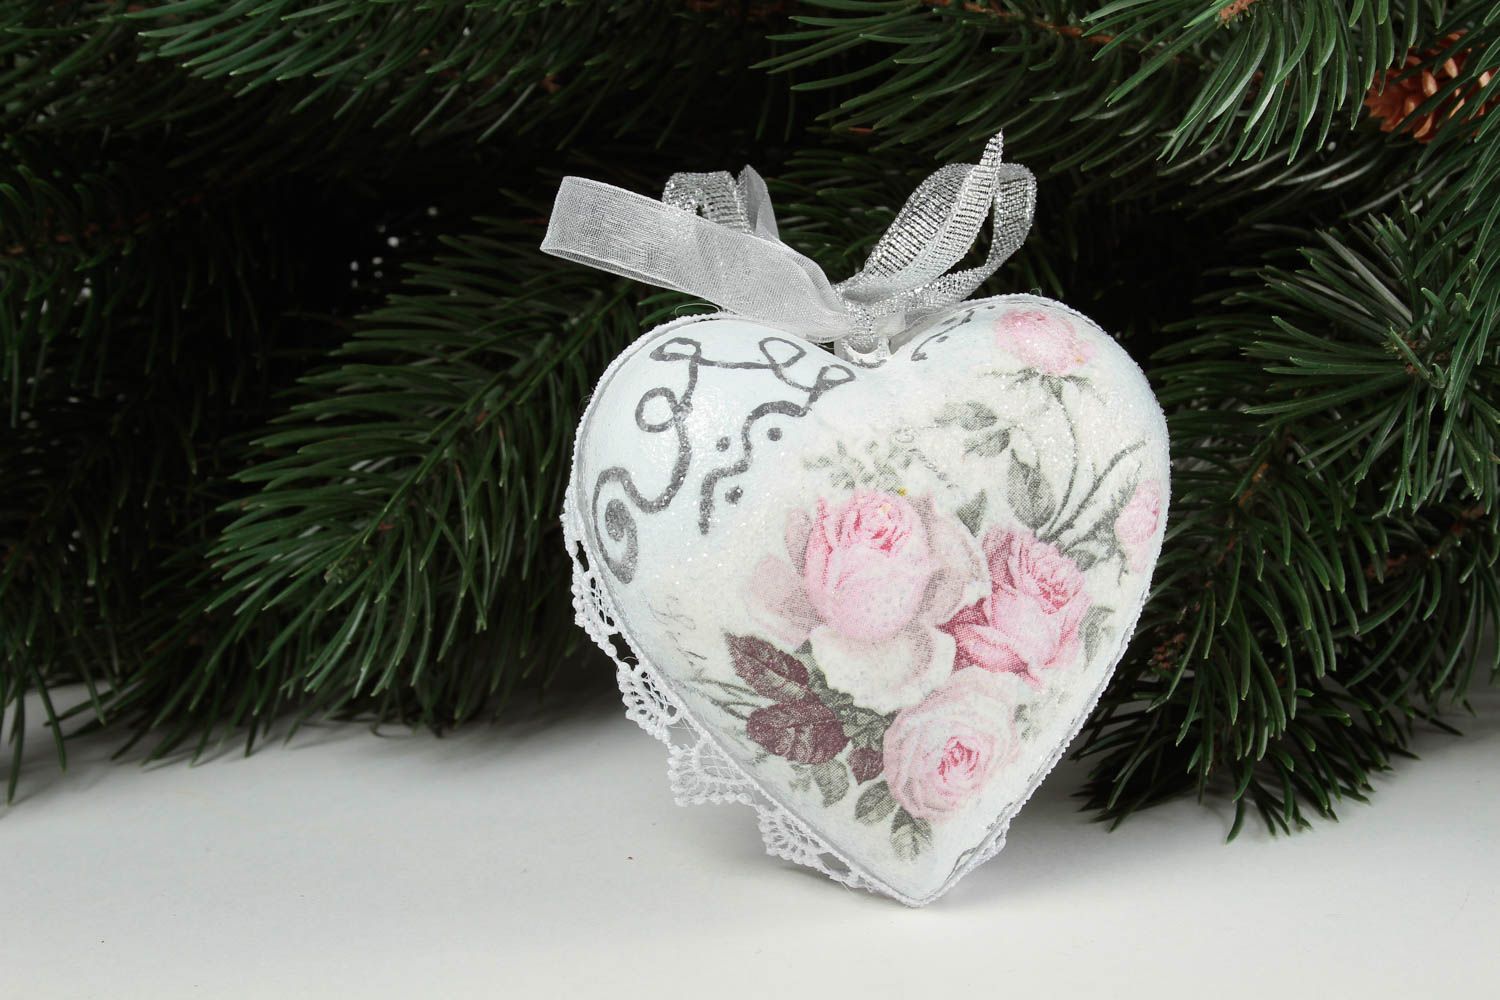 Handmade Christmas decoration decoupage ideas small gifts decorative use only photo 1